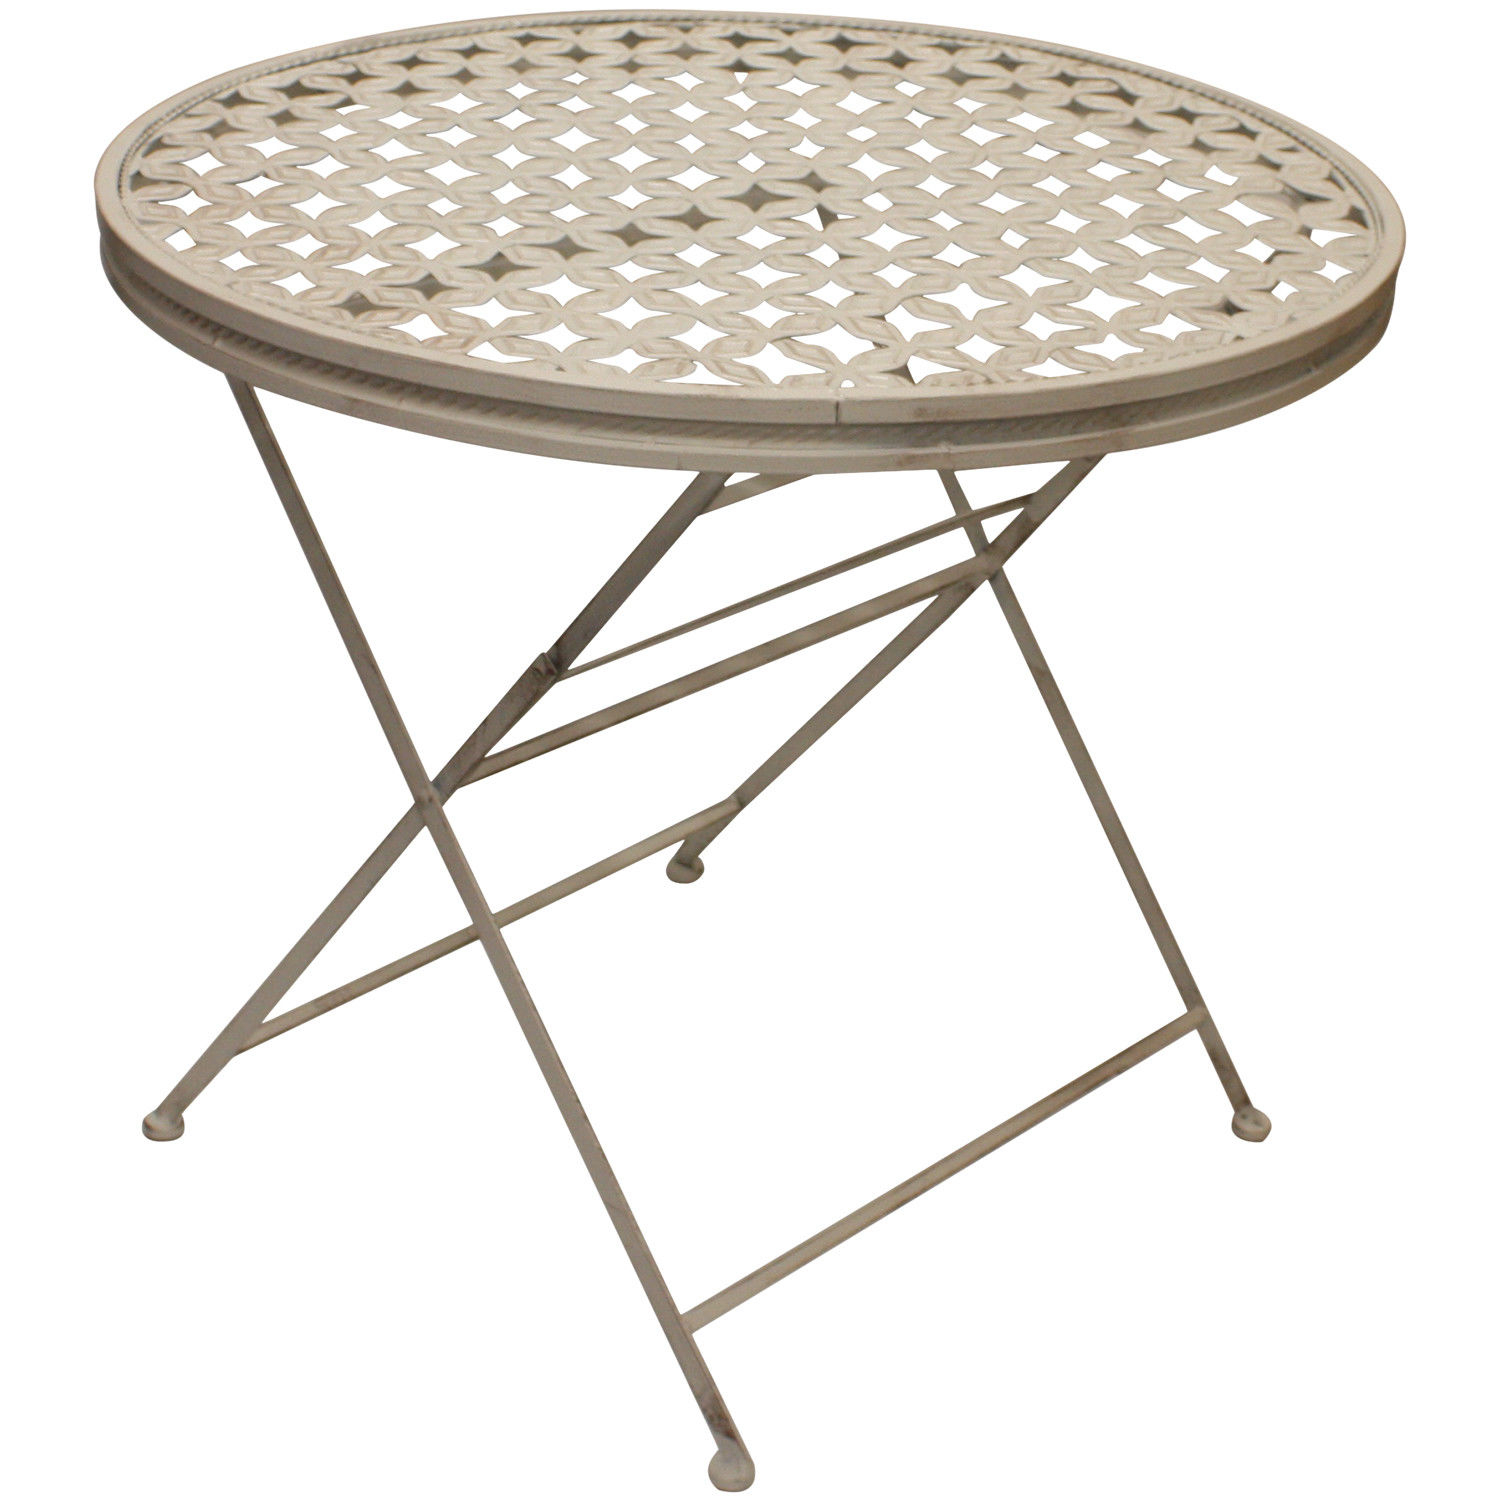 Round folding metal garden patio dining table outdoor furniture